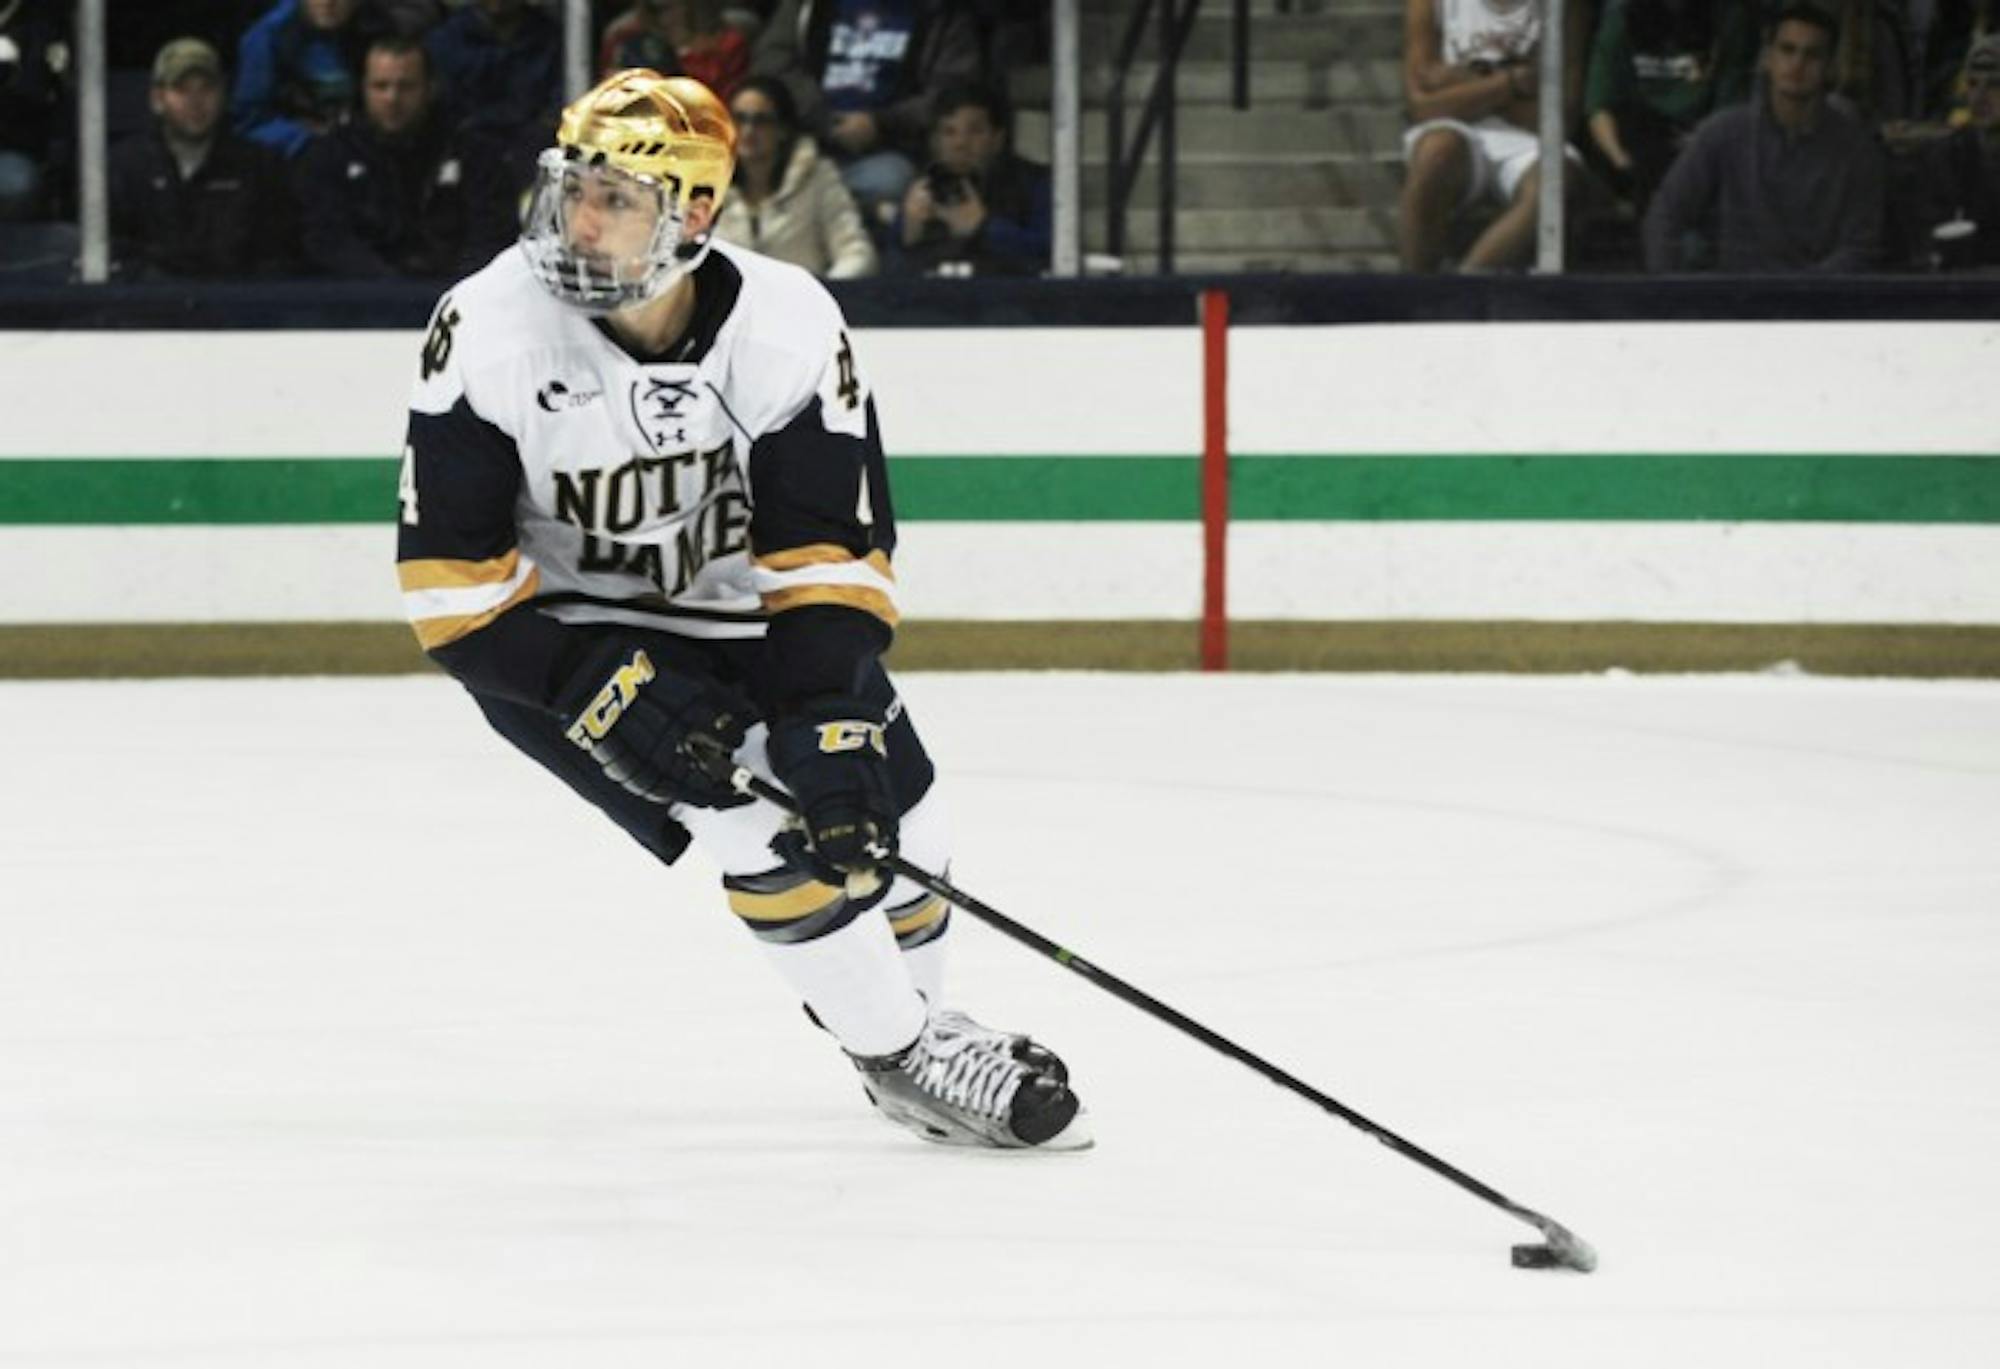 Sophomore defenseman Dennis Gilbert surveys the ice during Notre Dame's 4-1 victory over UMass Lowell on Nov. 18 at Compton Family Ice Arena.